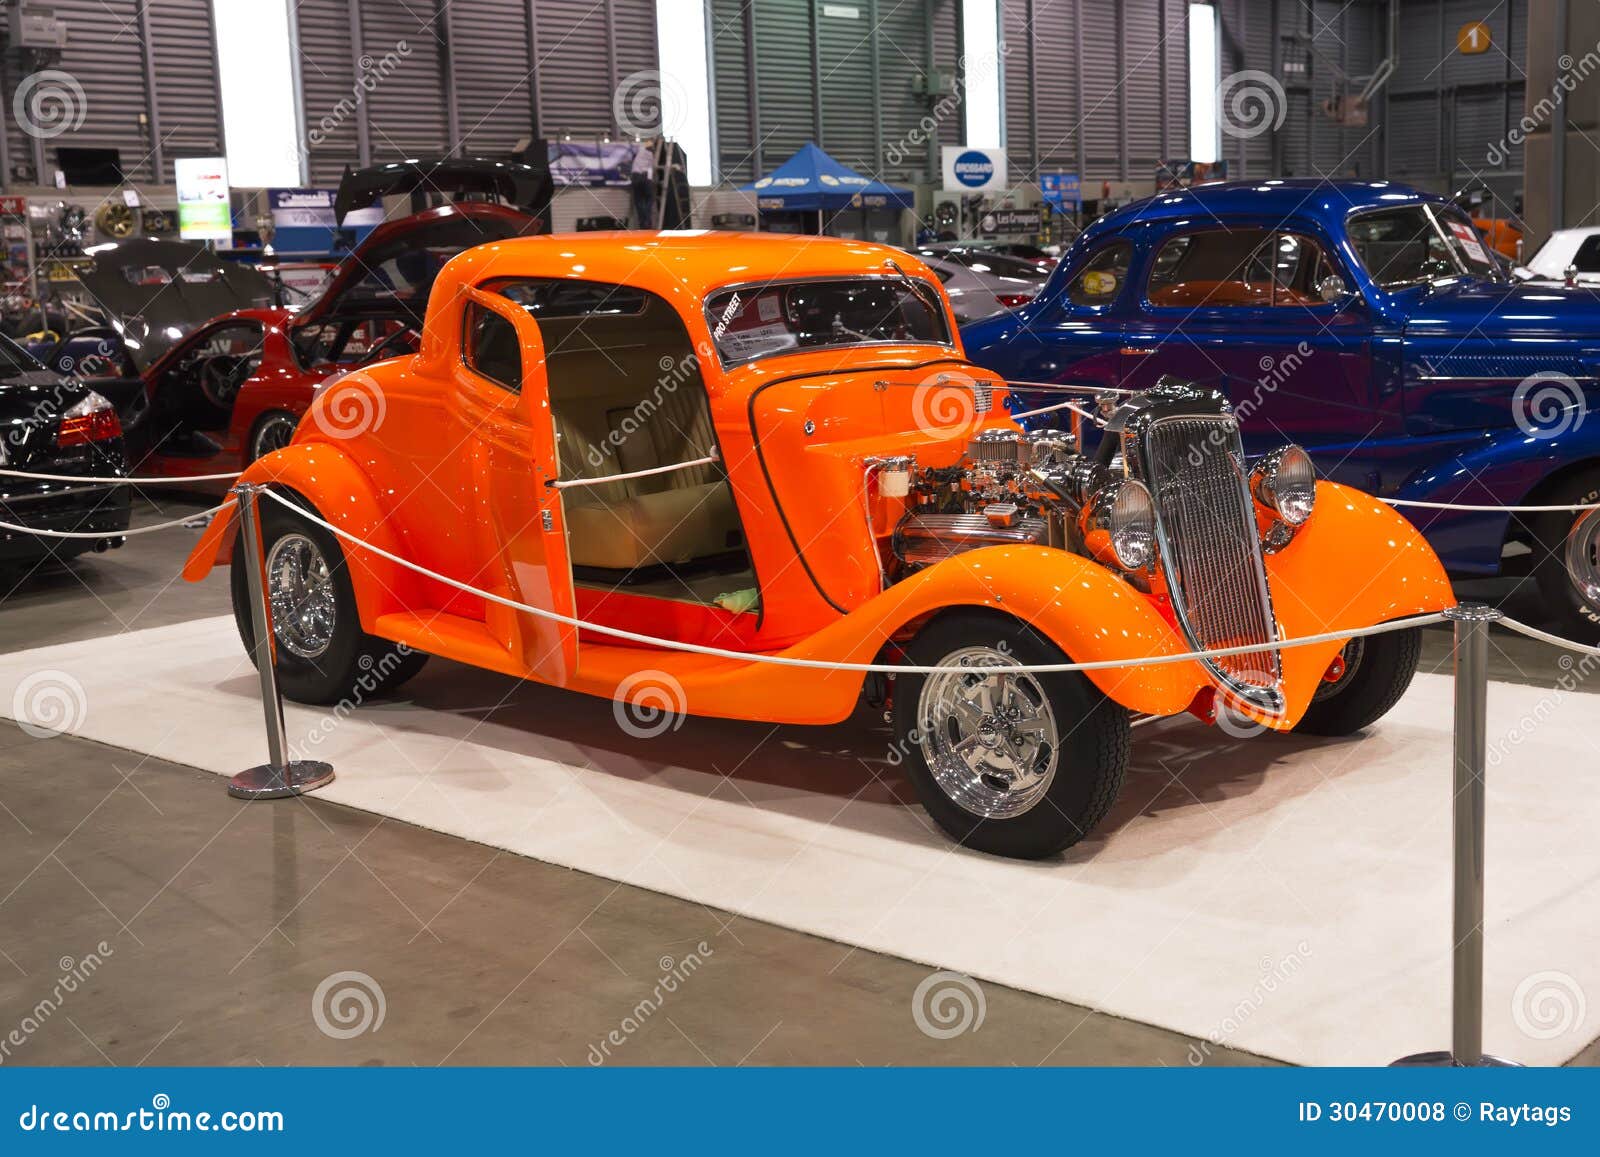 Vintage car. Picture of the hot rod at the international show car association 2013. Isca show car 2013 at quebec, canada.